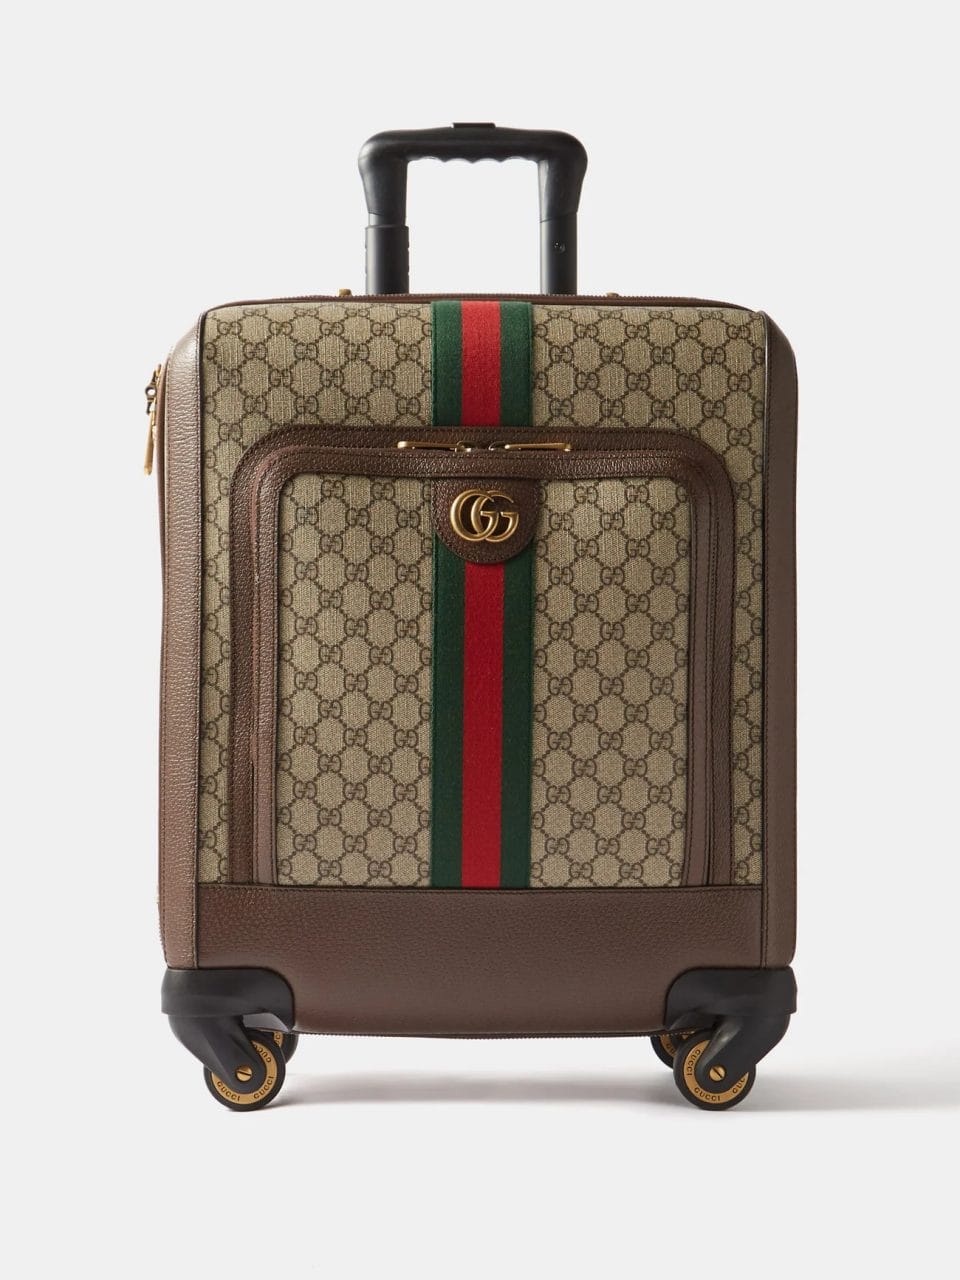 Gucci Savoy large duffle bag in beige and blue GG Supreme